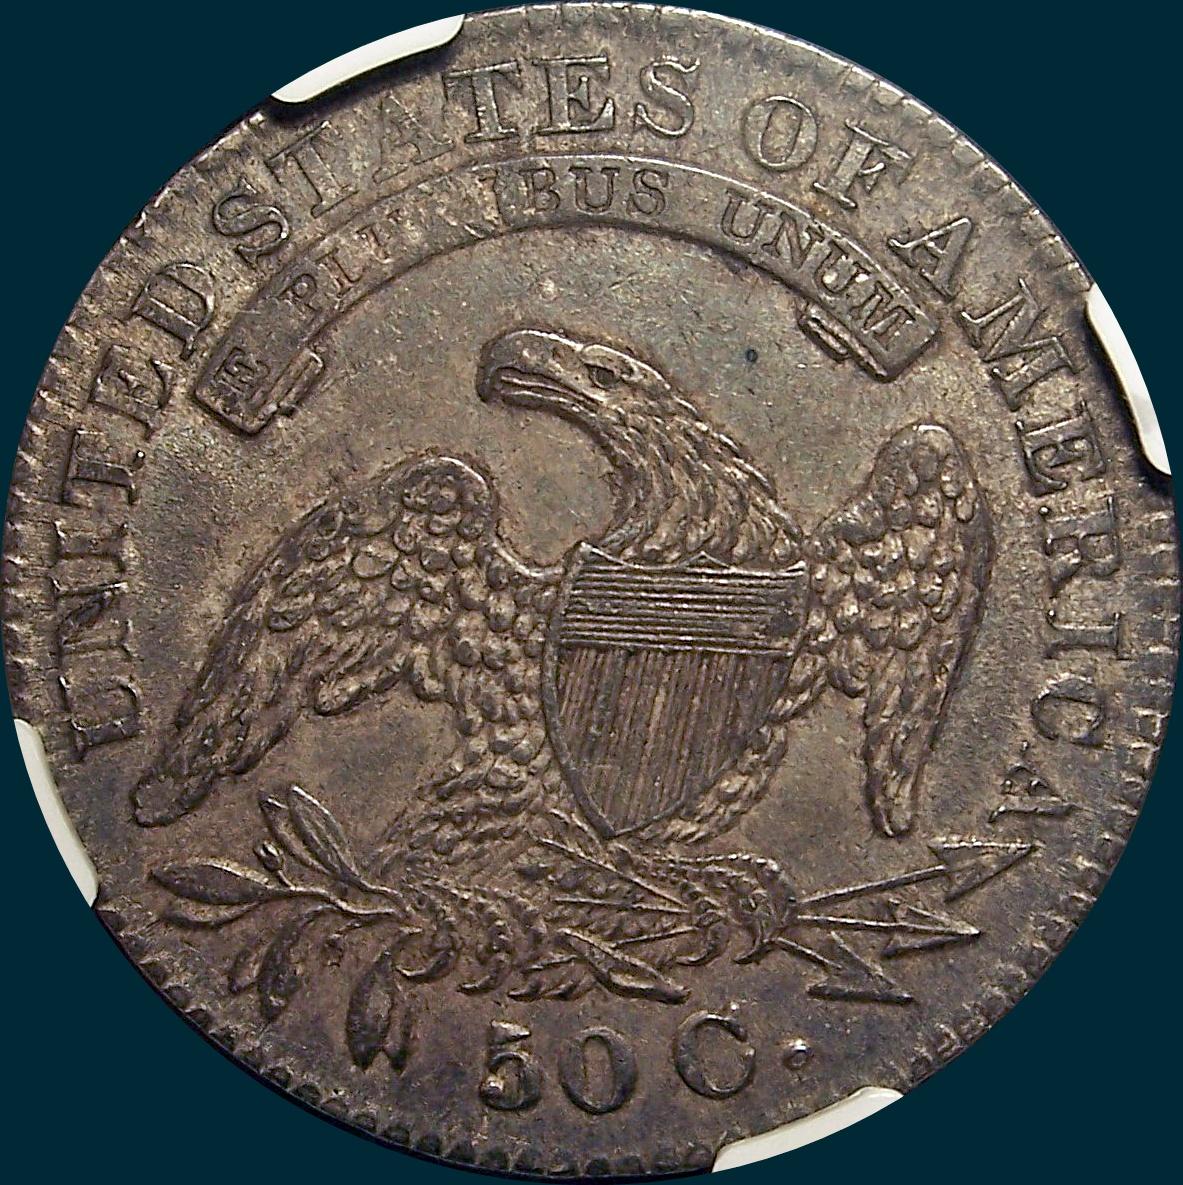 1832, O-110, Small Letters, Capped Bust, Half Dollar